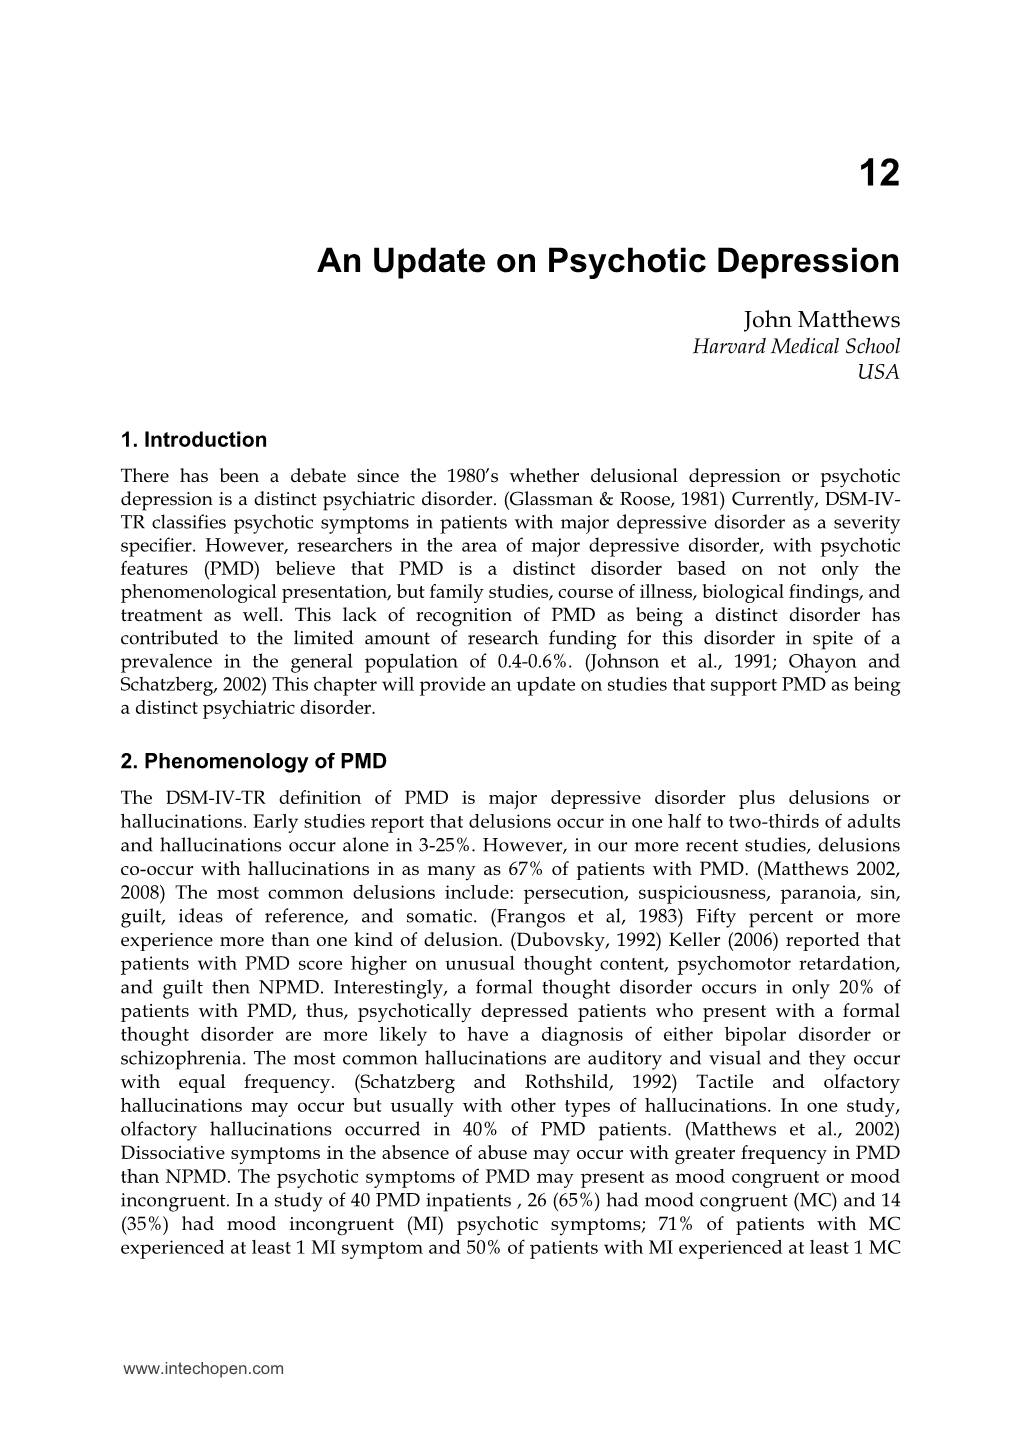 An Update on Psychotic Depression